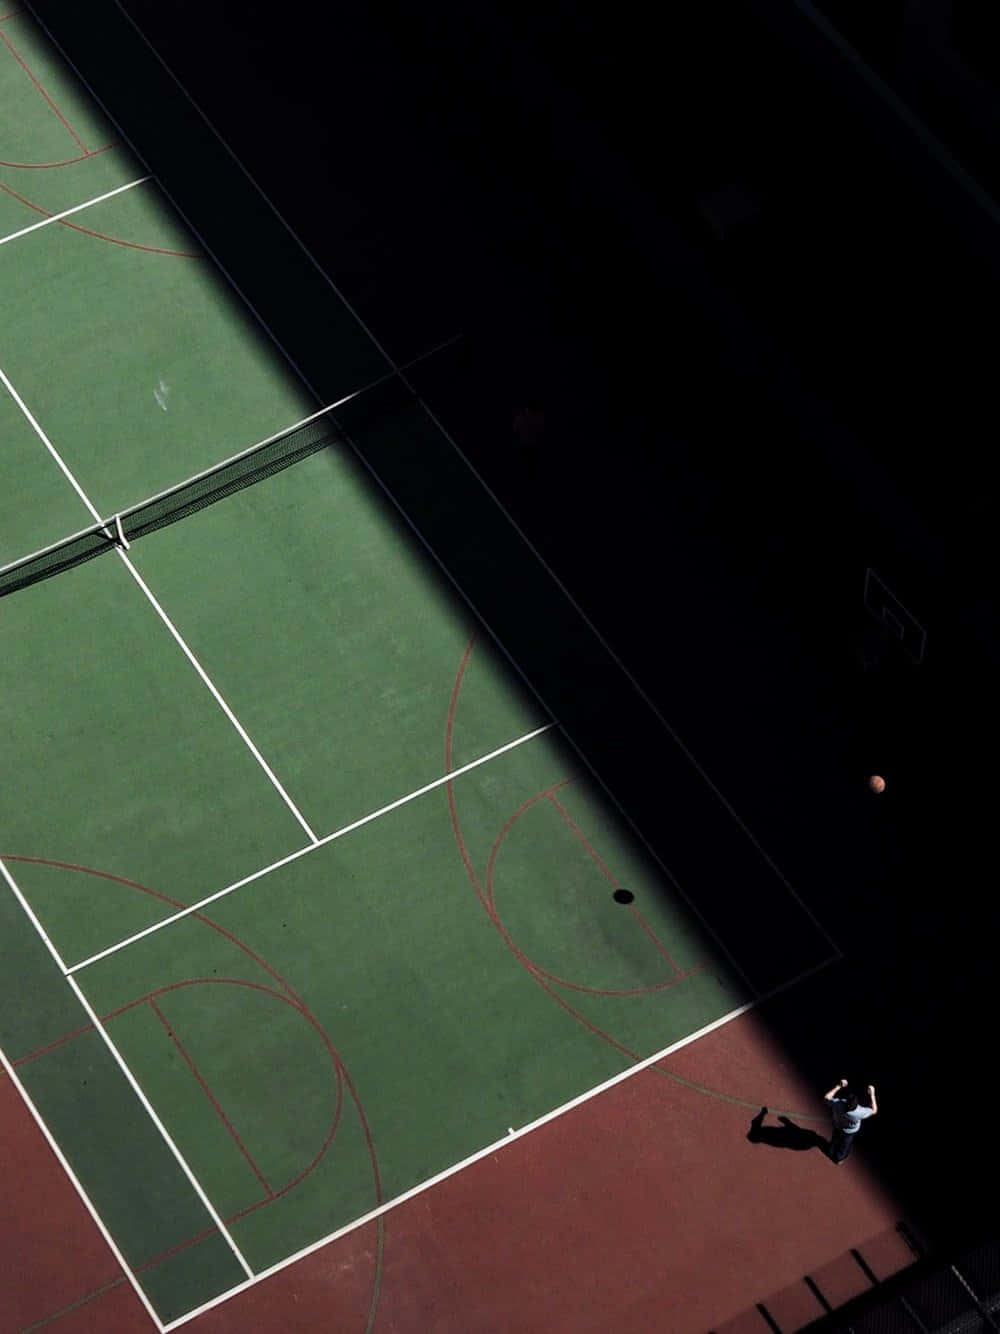 A Tennis Court With A Person Playing Tennis